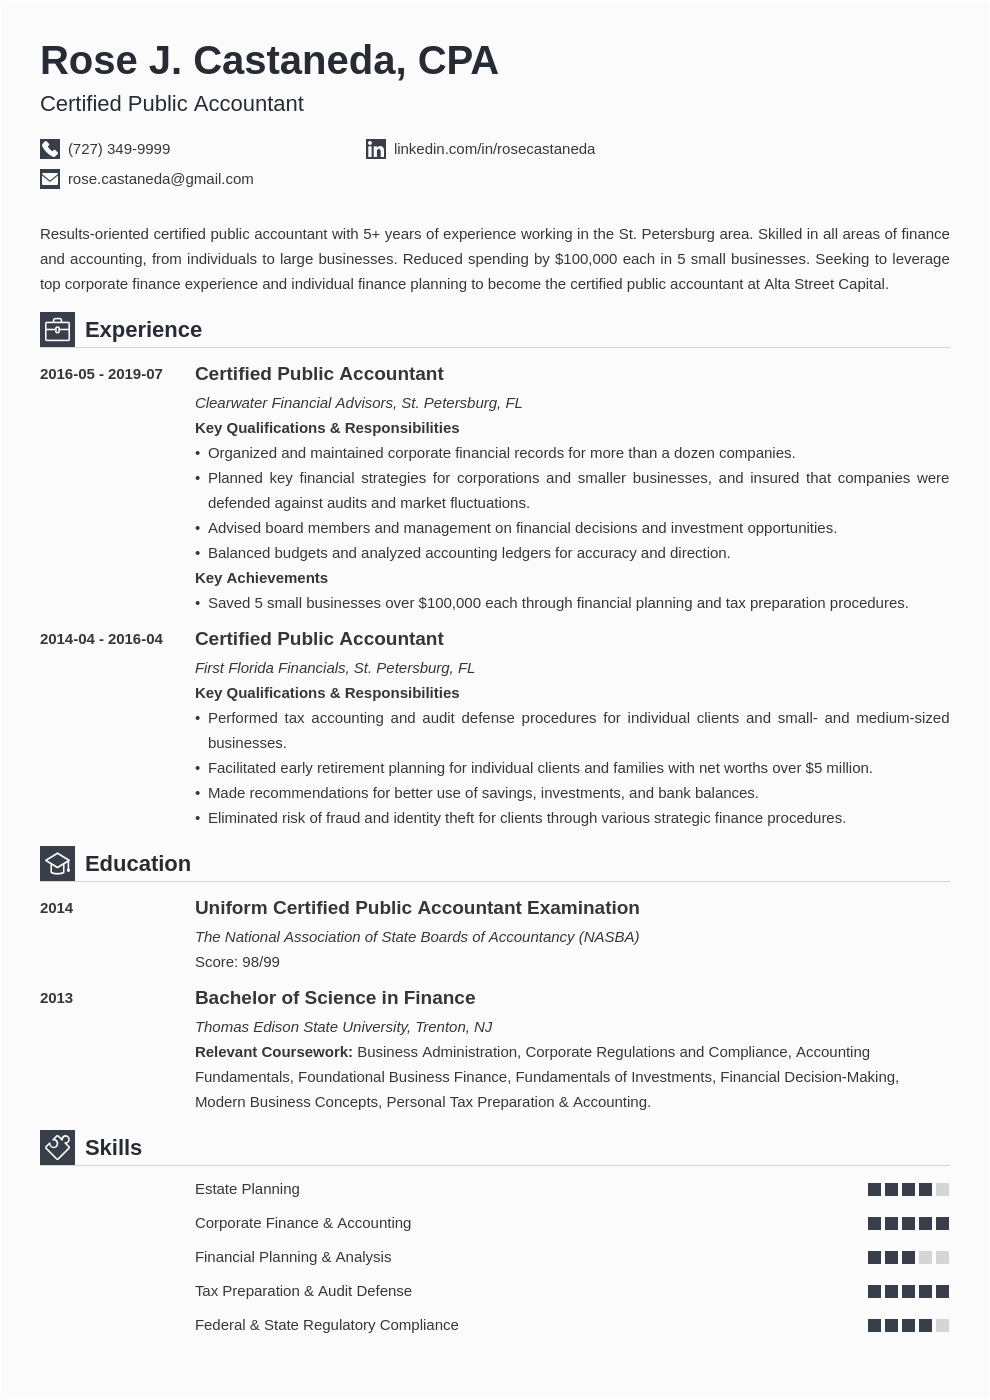 cpa resume example